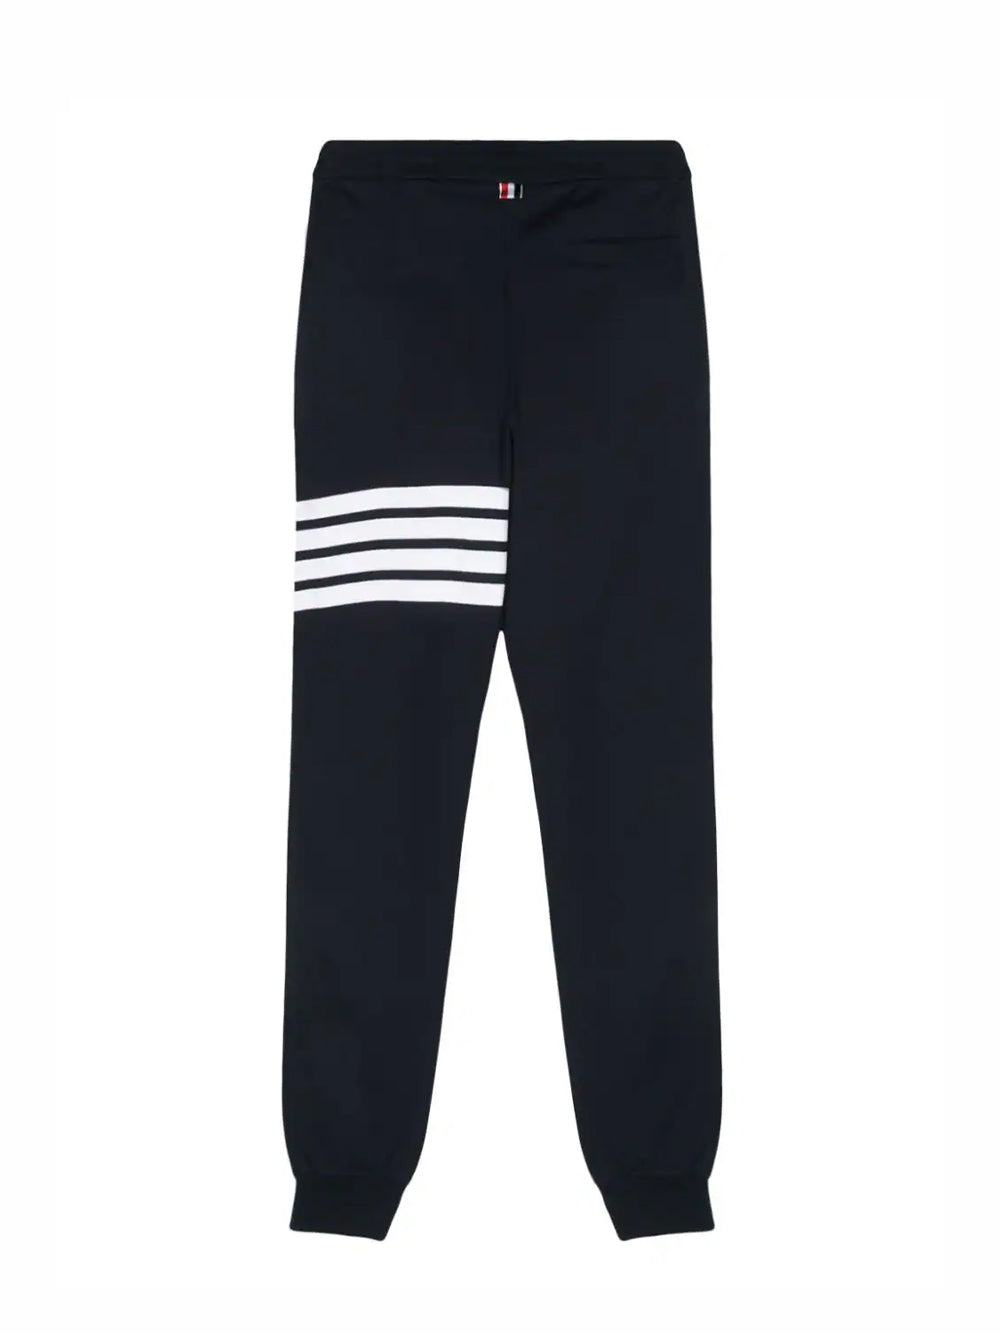 Classic Sweatpant With Engineered 4-Bar In Classic Loop Back W/ Engineered 4 Bar (Navy)